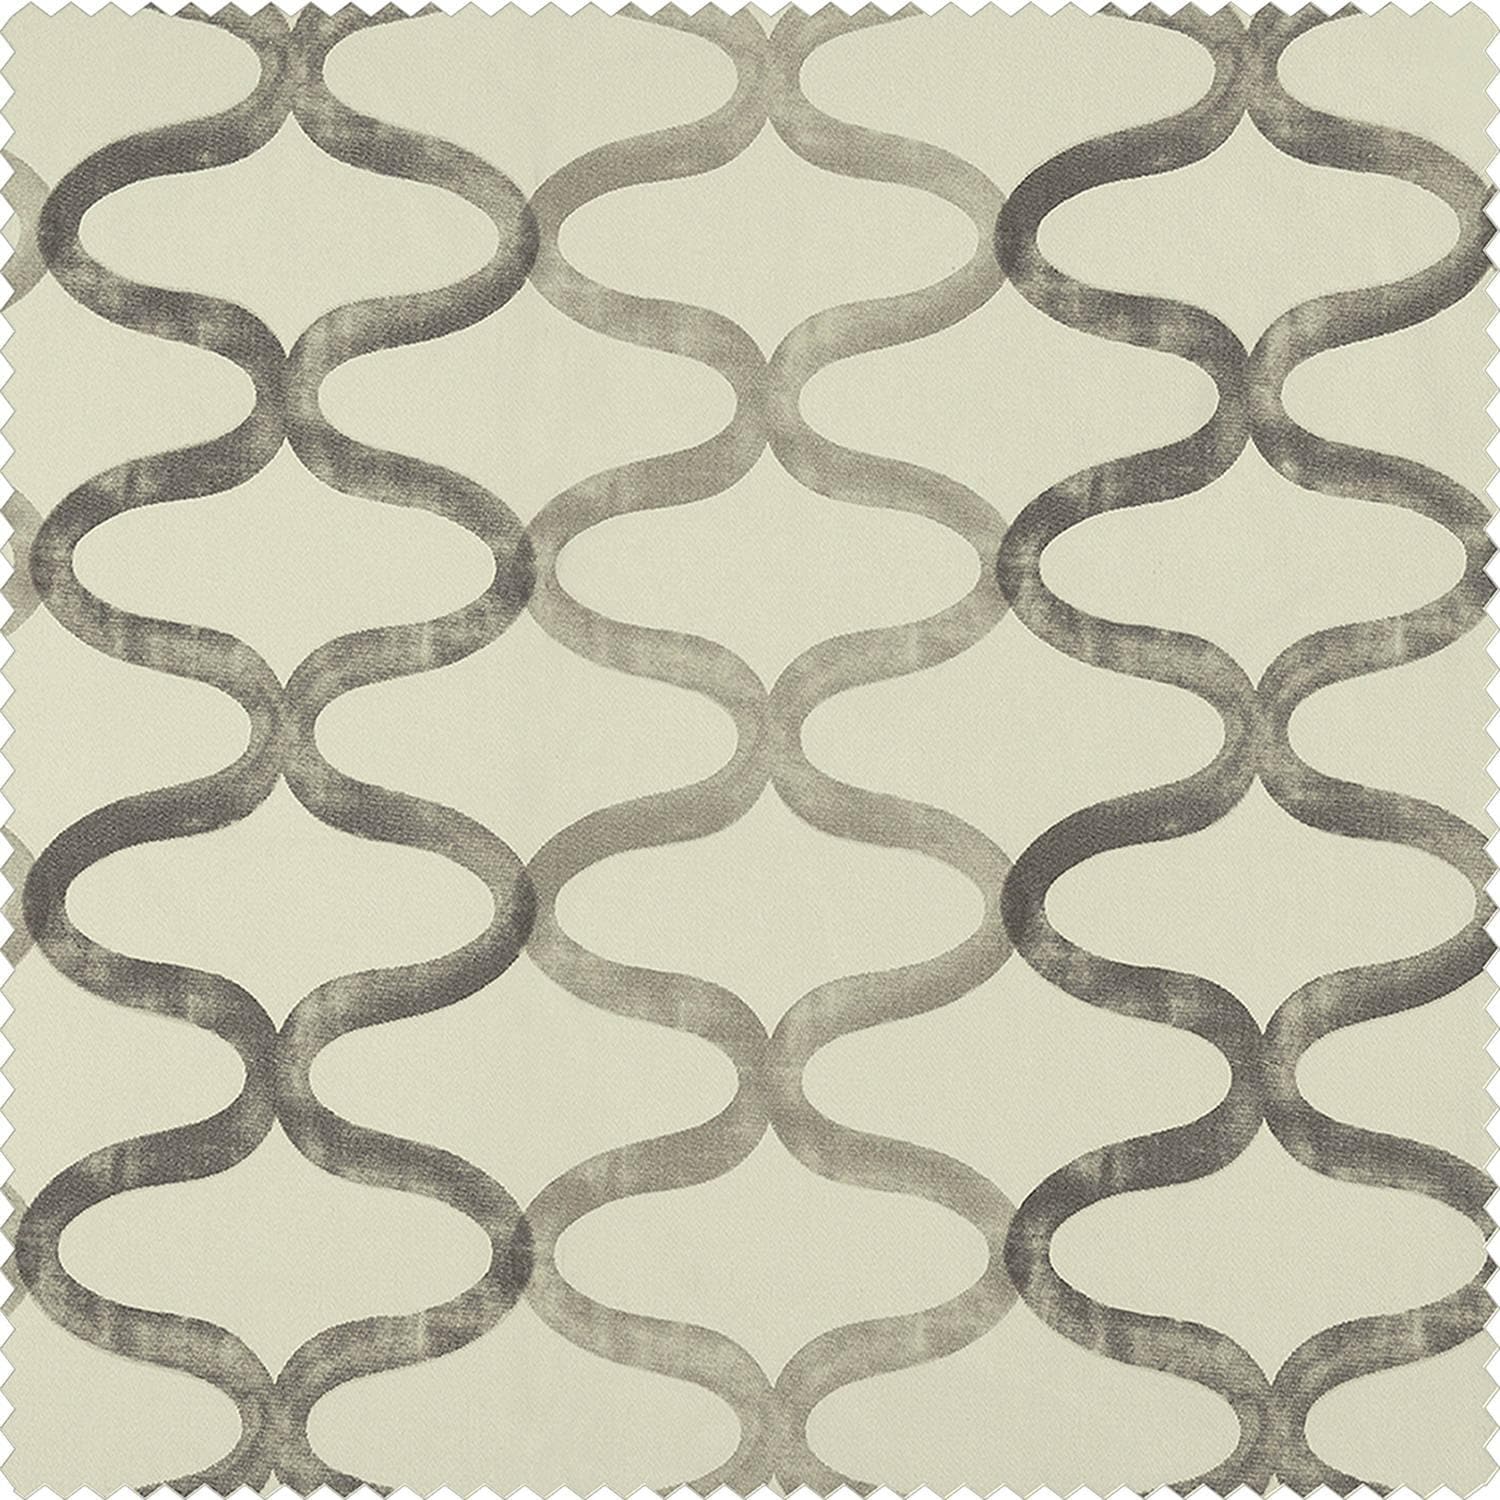 Illusions Silver Grey Printed Cotton Curtain